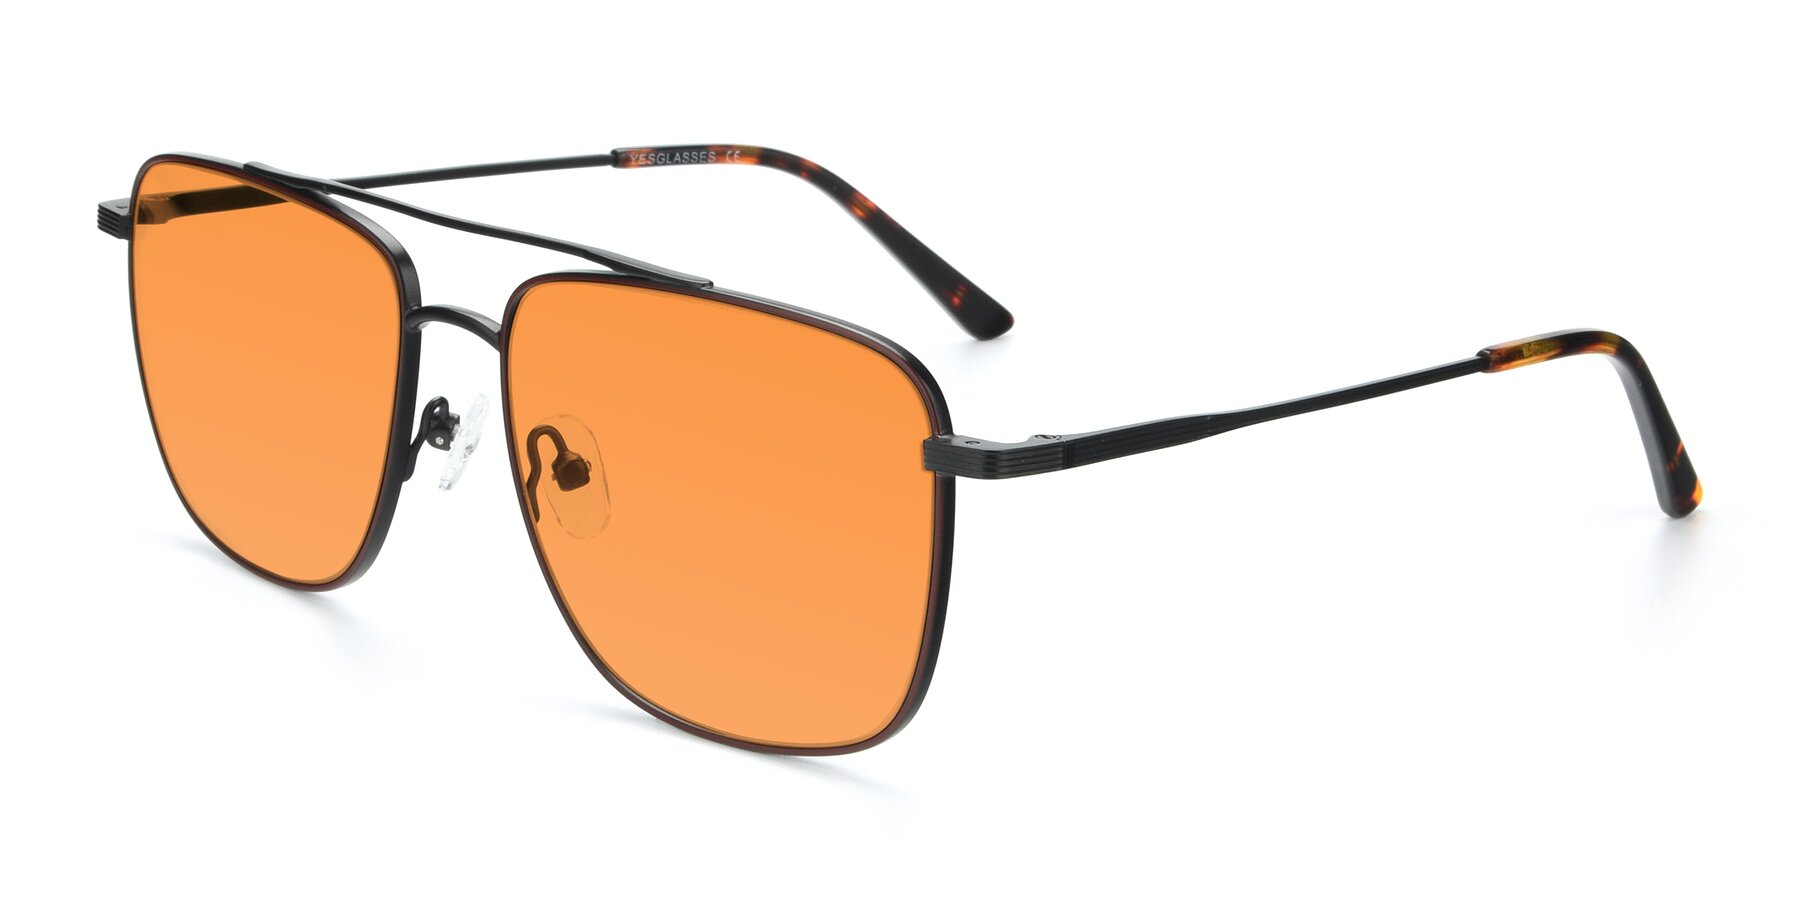 Angle of 9519 in Brown-Black with Orange Tinted Lenses